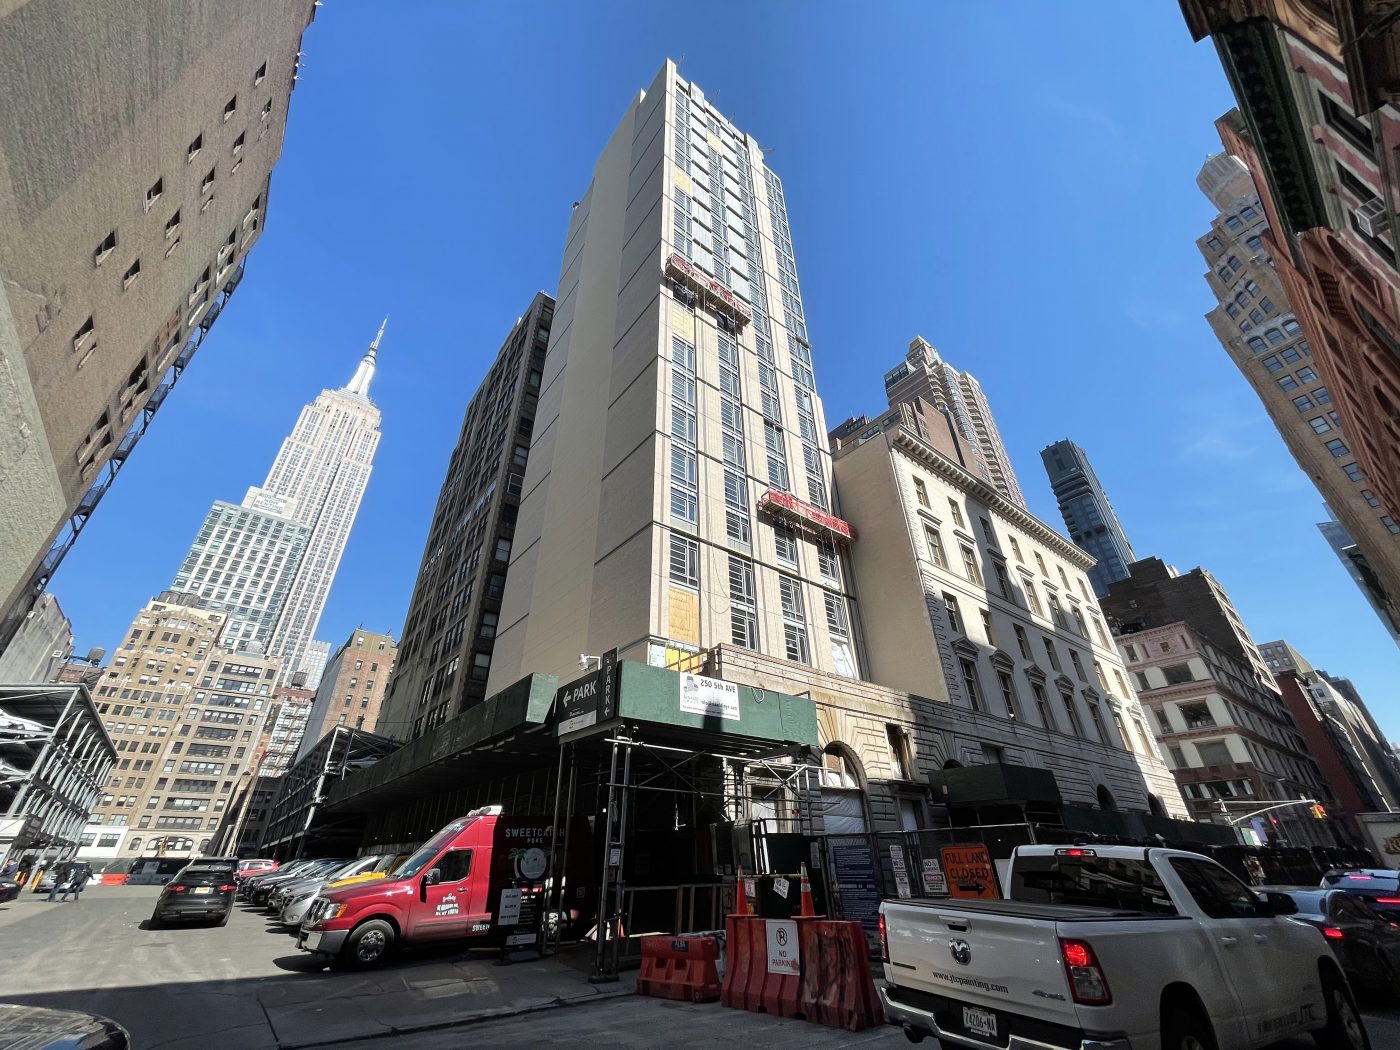 Fifth Avenue Hotel's Renovated Façade Revealed at 250 Fifth Avenue in